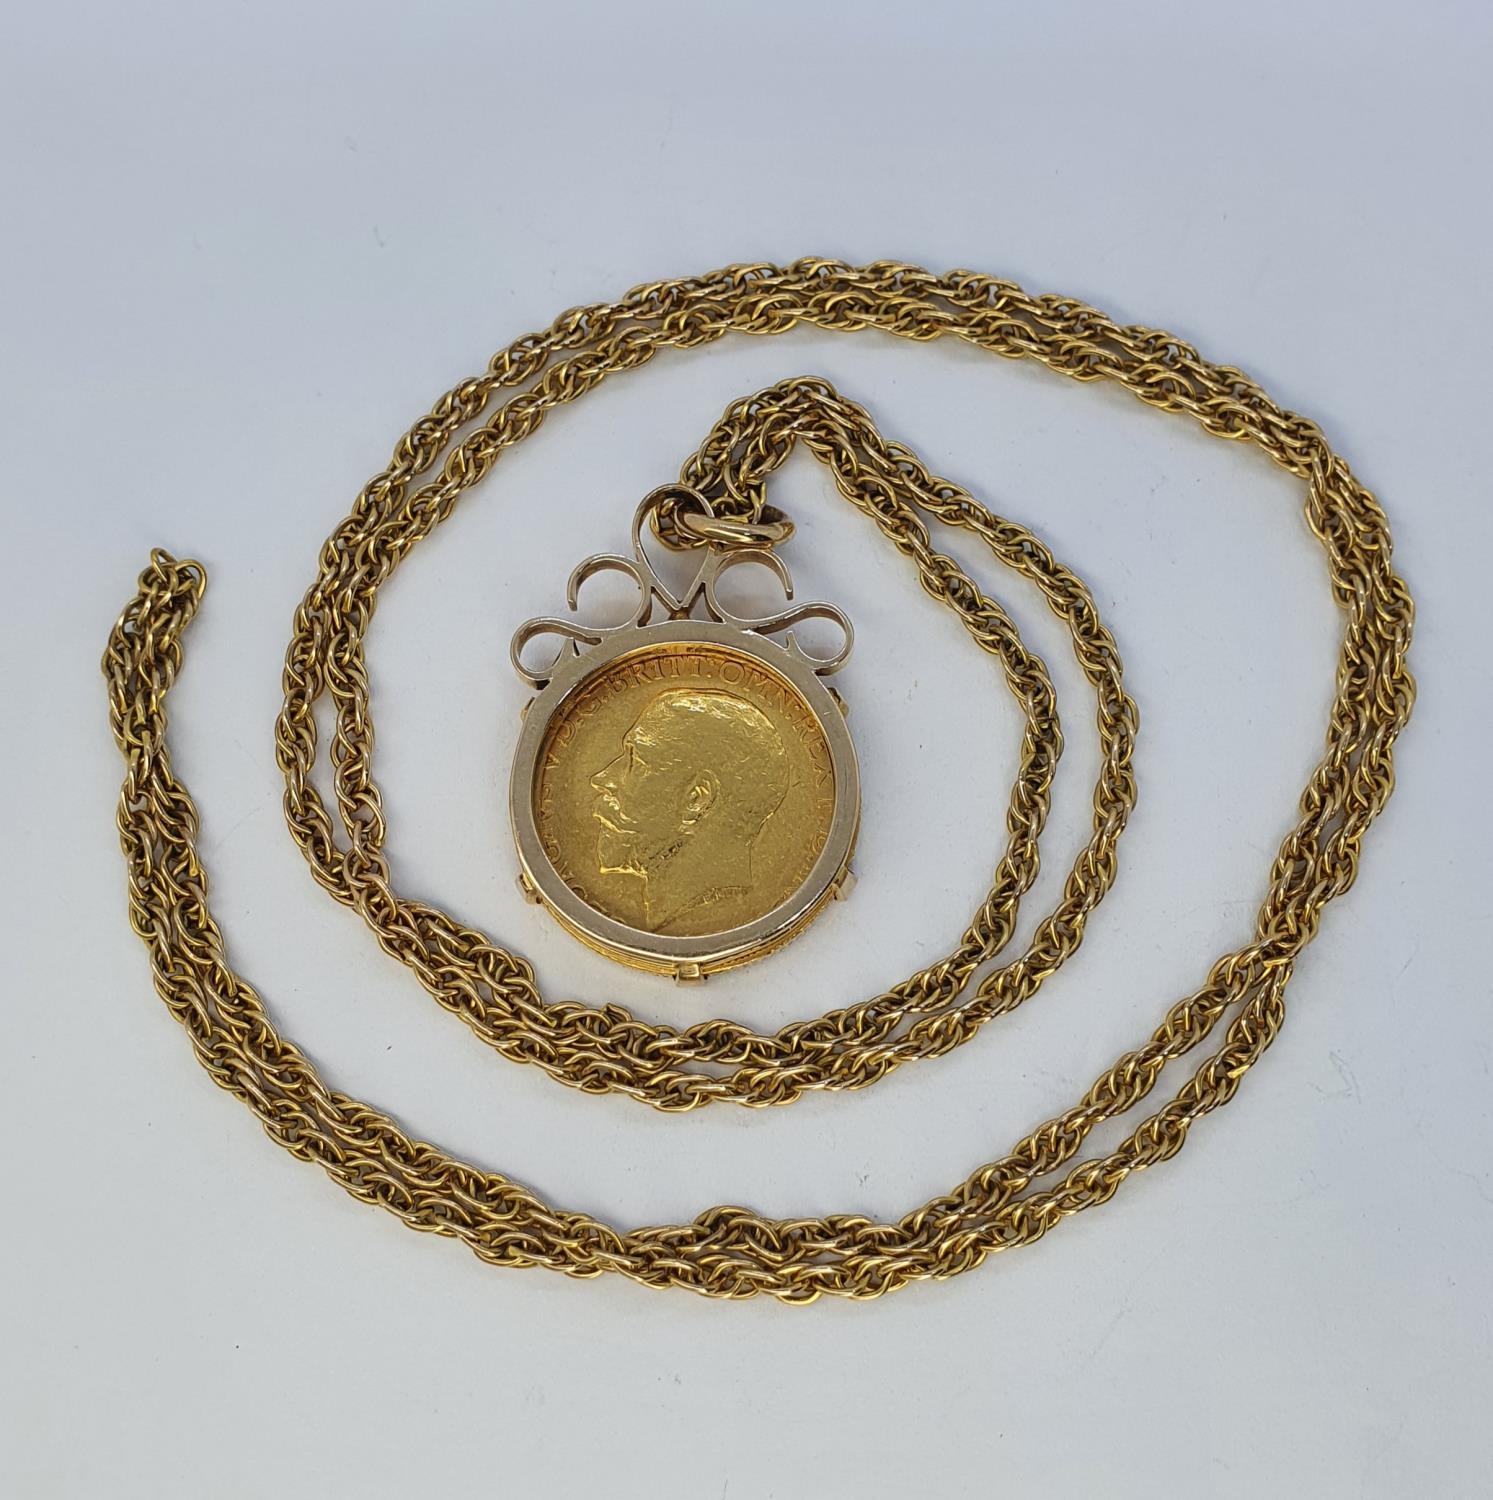 A George V sovereign, 1912, mounted as a pendant, on a chain - Image 3 of 3